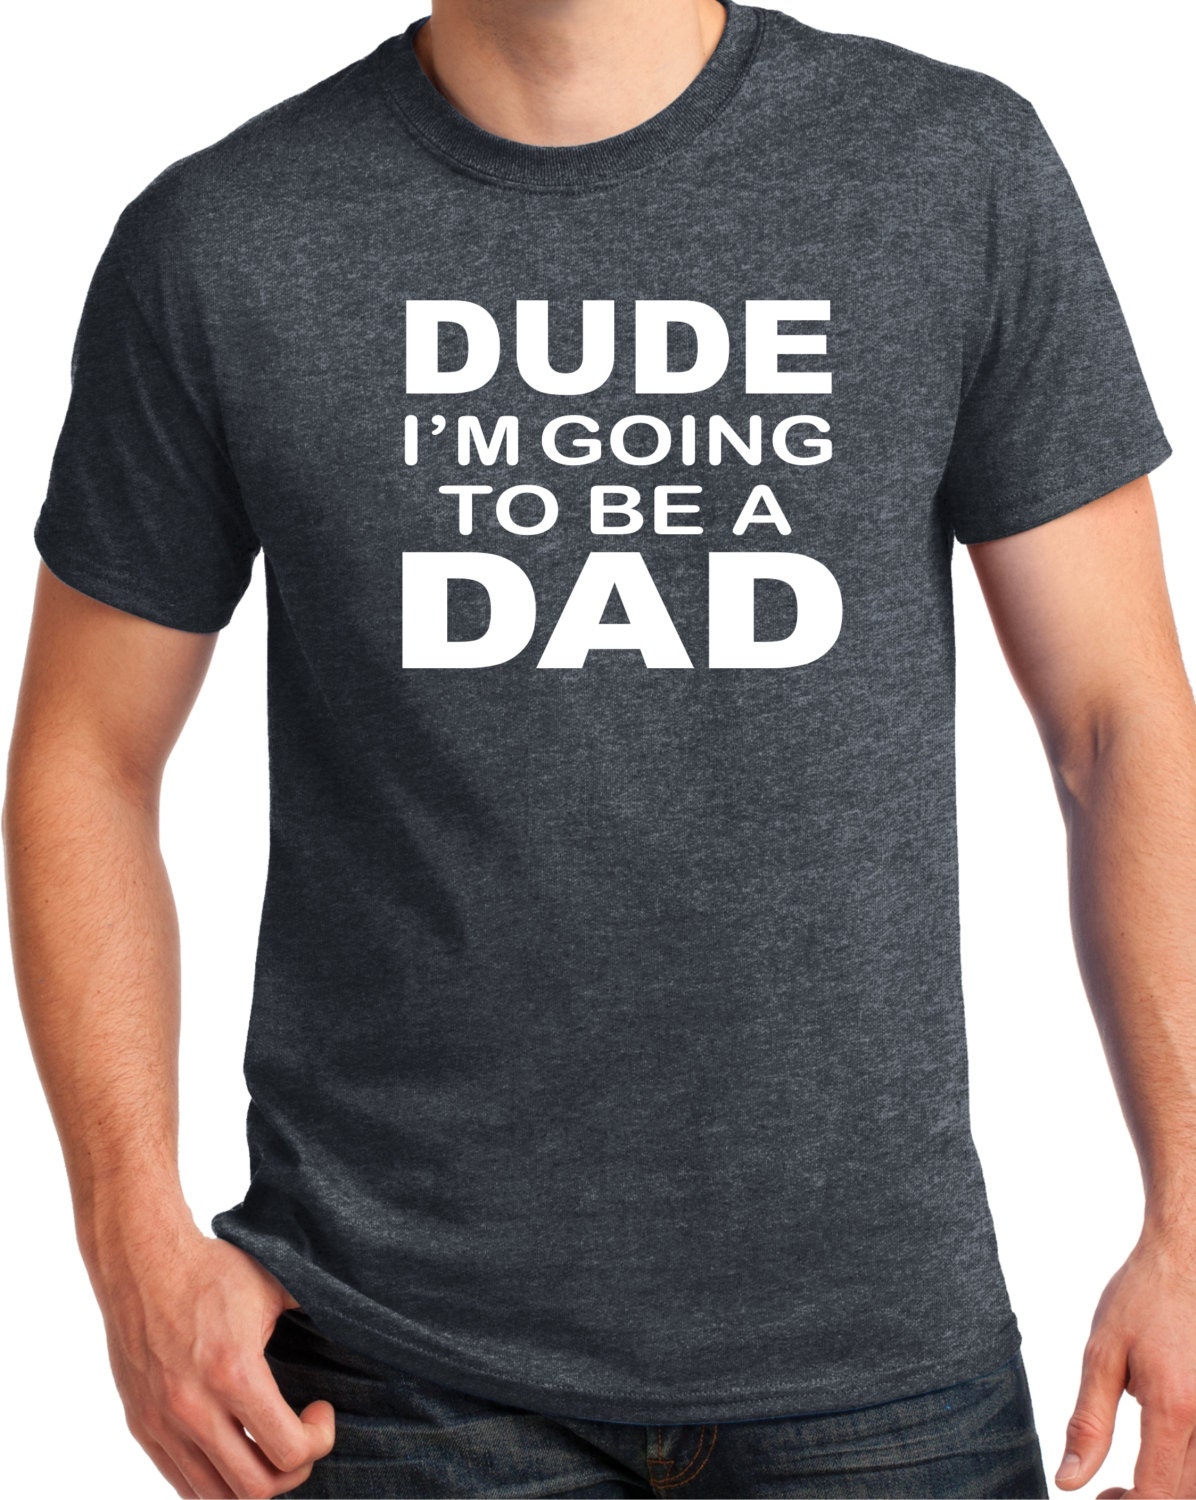 NEW DAD shirt Dude I'm going to be a dad pregnancy